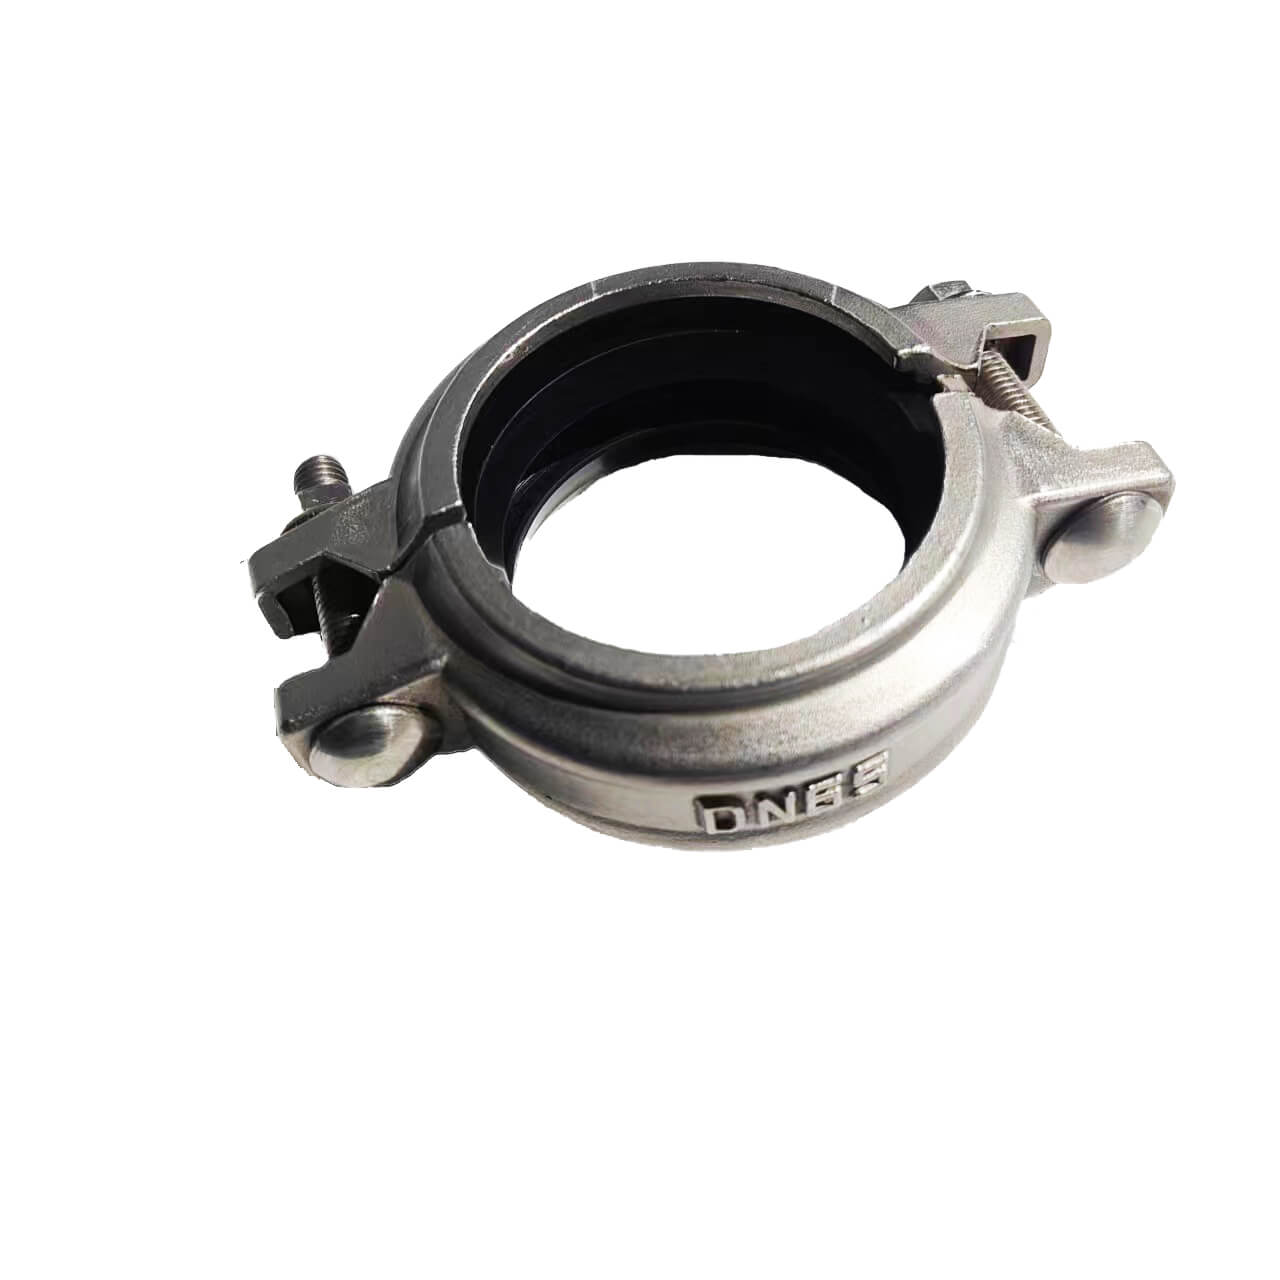 Tontr 12 in Stainless Steel Grooved Fittings Rigid Coupling for Water system